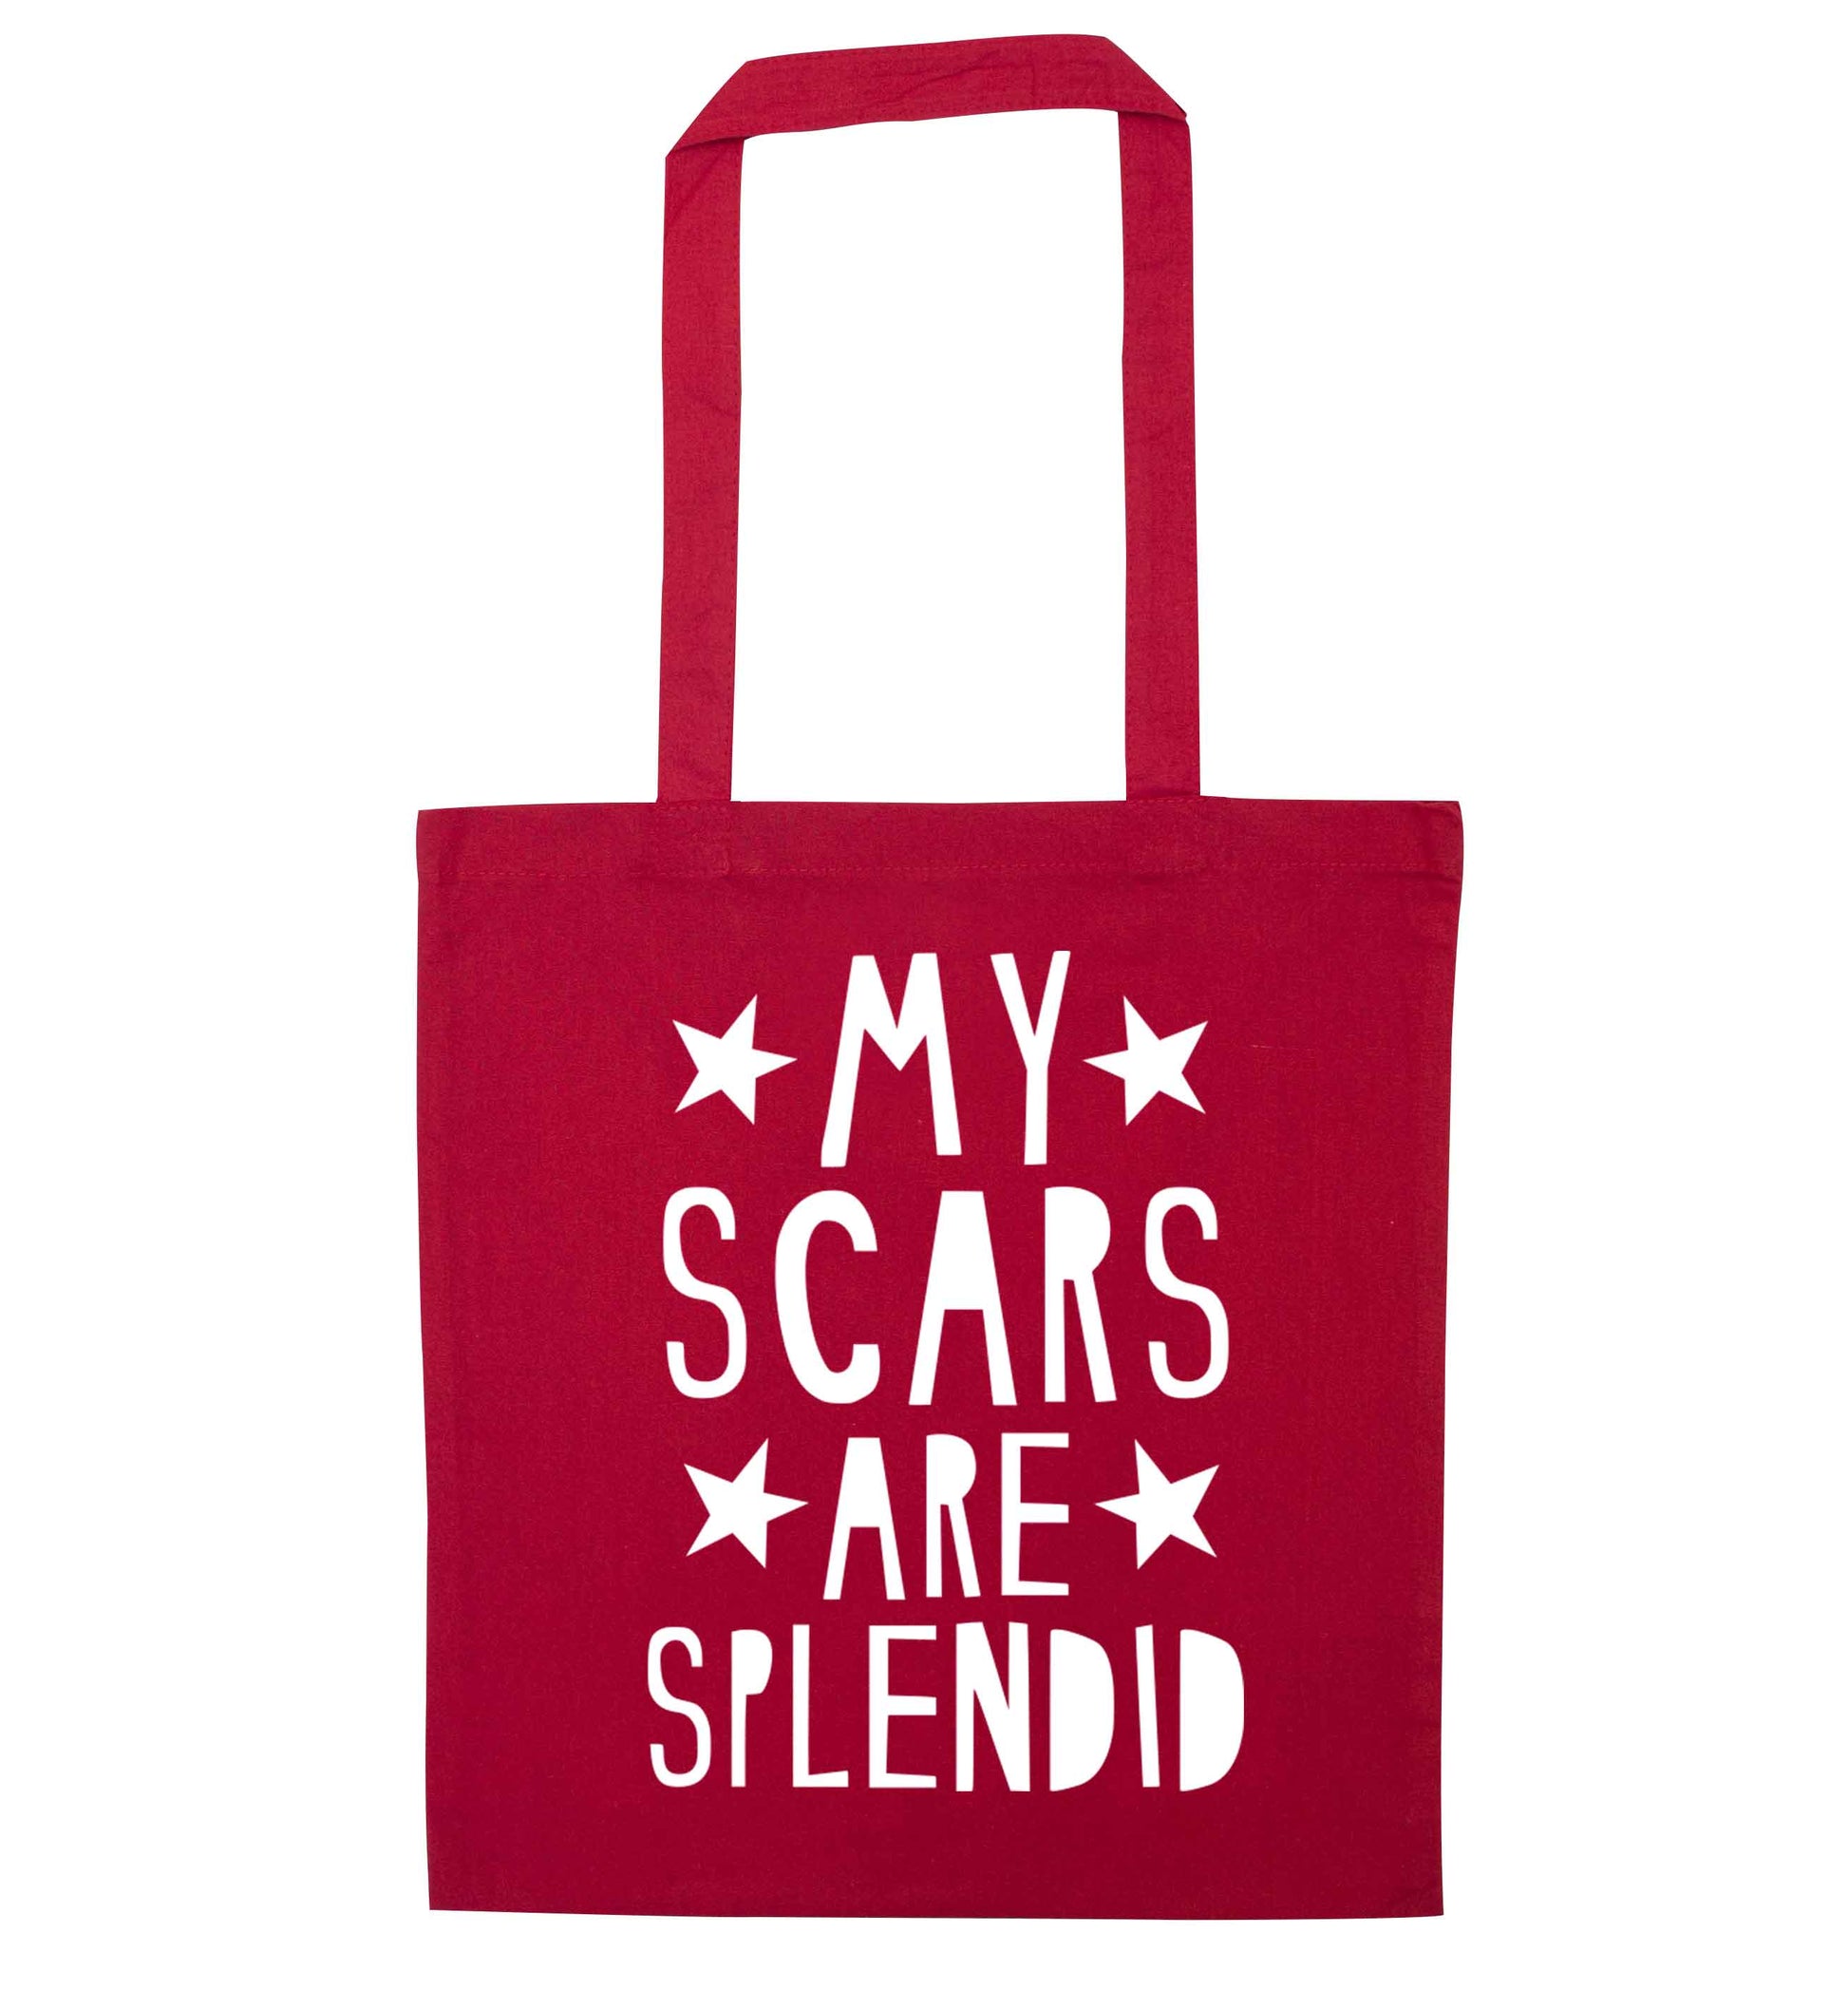 My scars are beautiful red tote bag